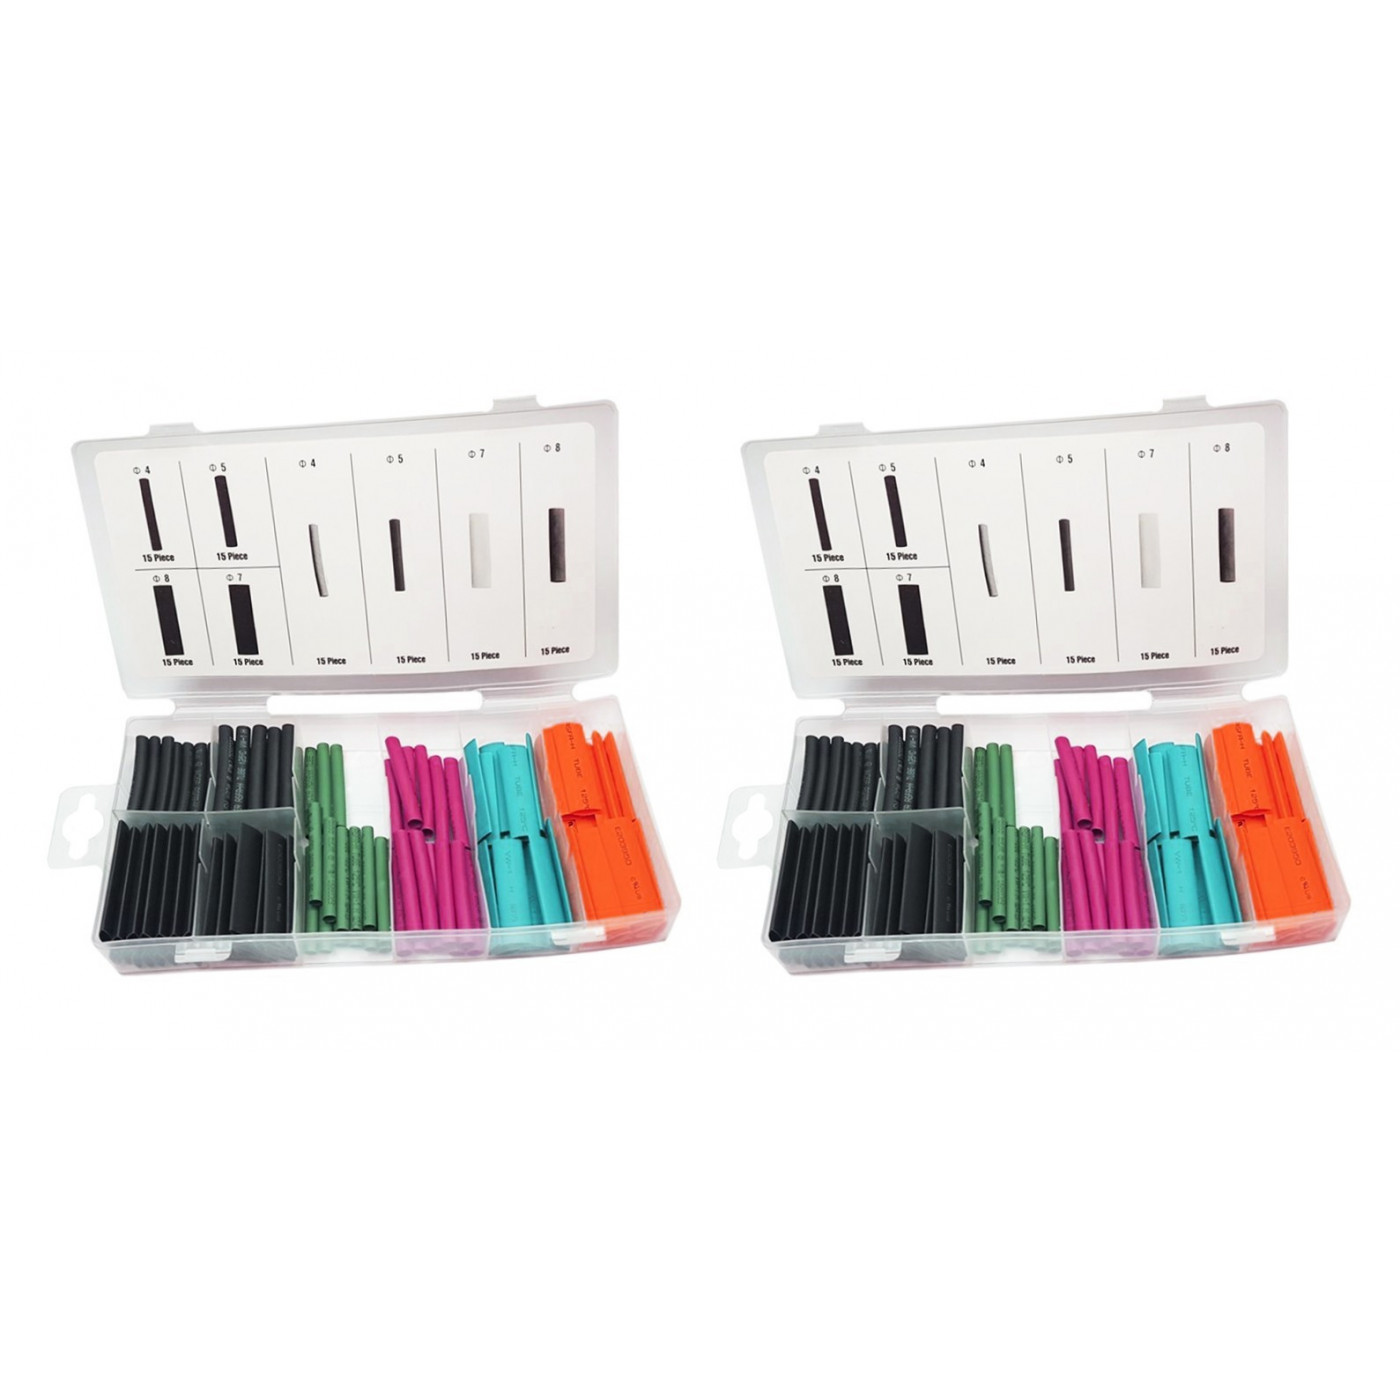 Heat shrink tubing set (240 pieces: 4, 5, 7 and 8 mm)